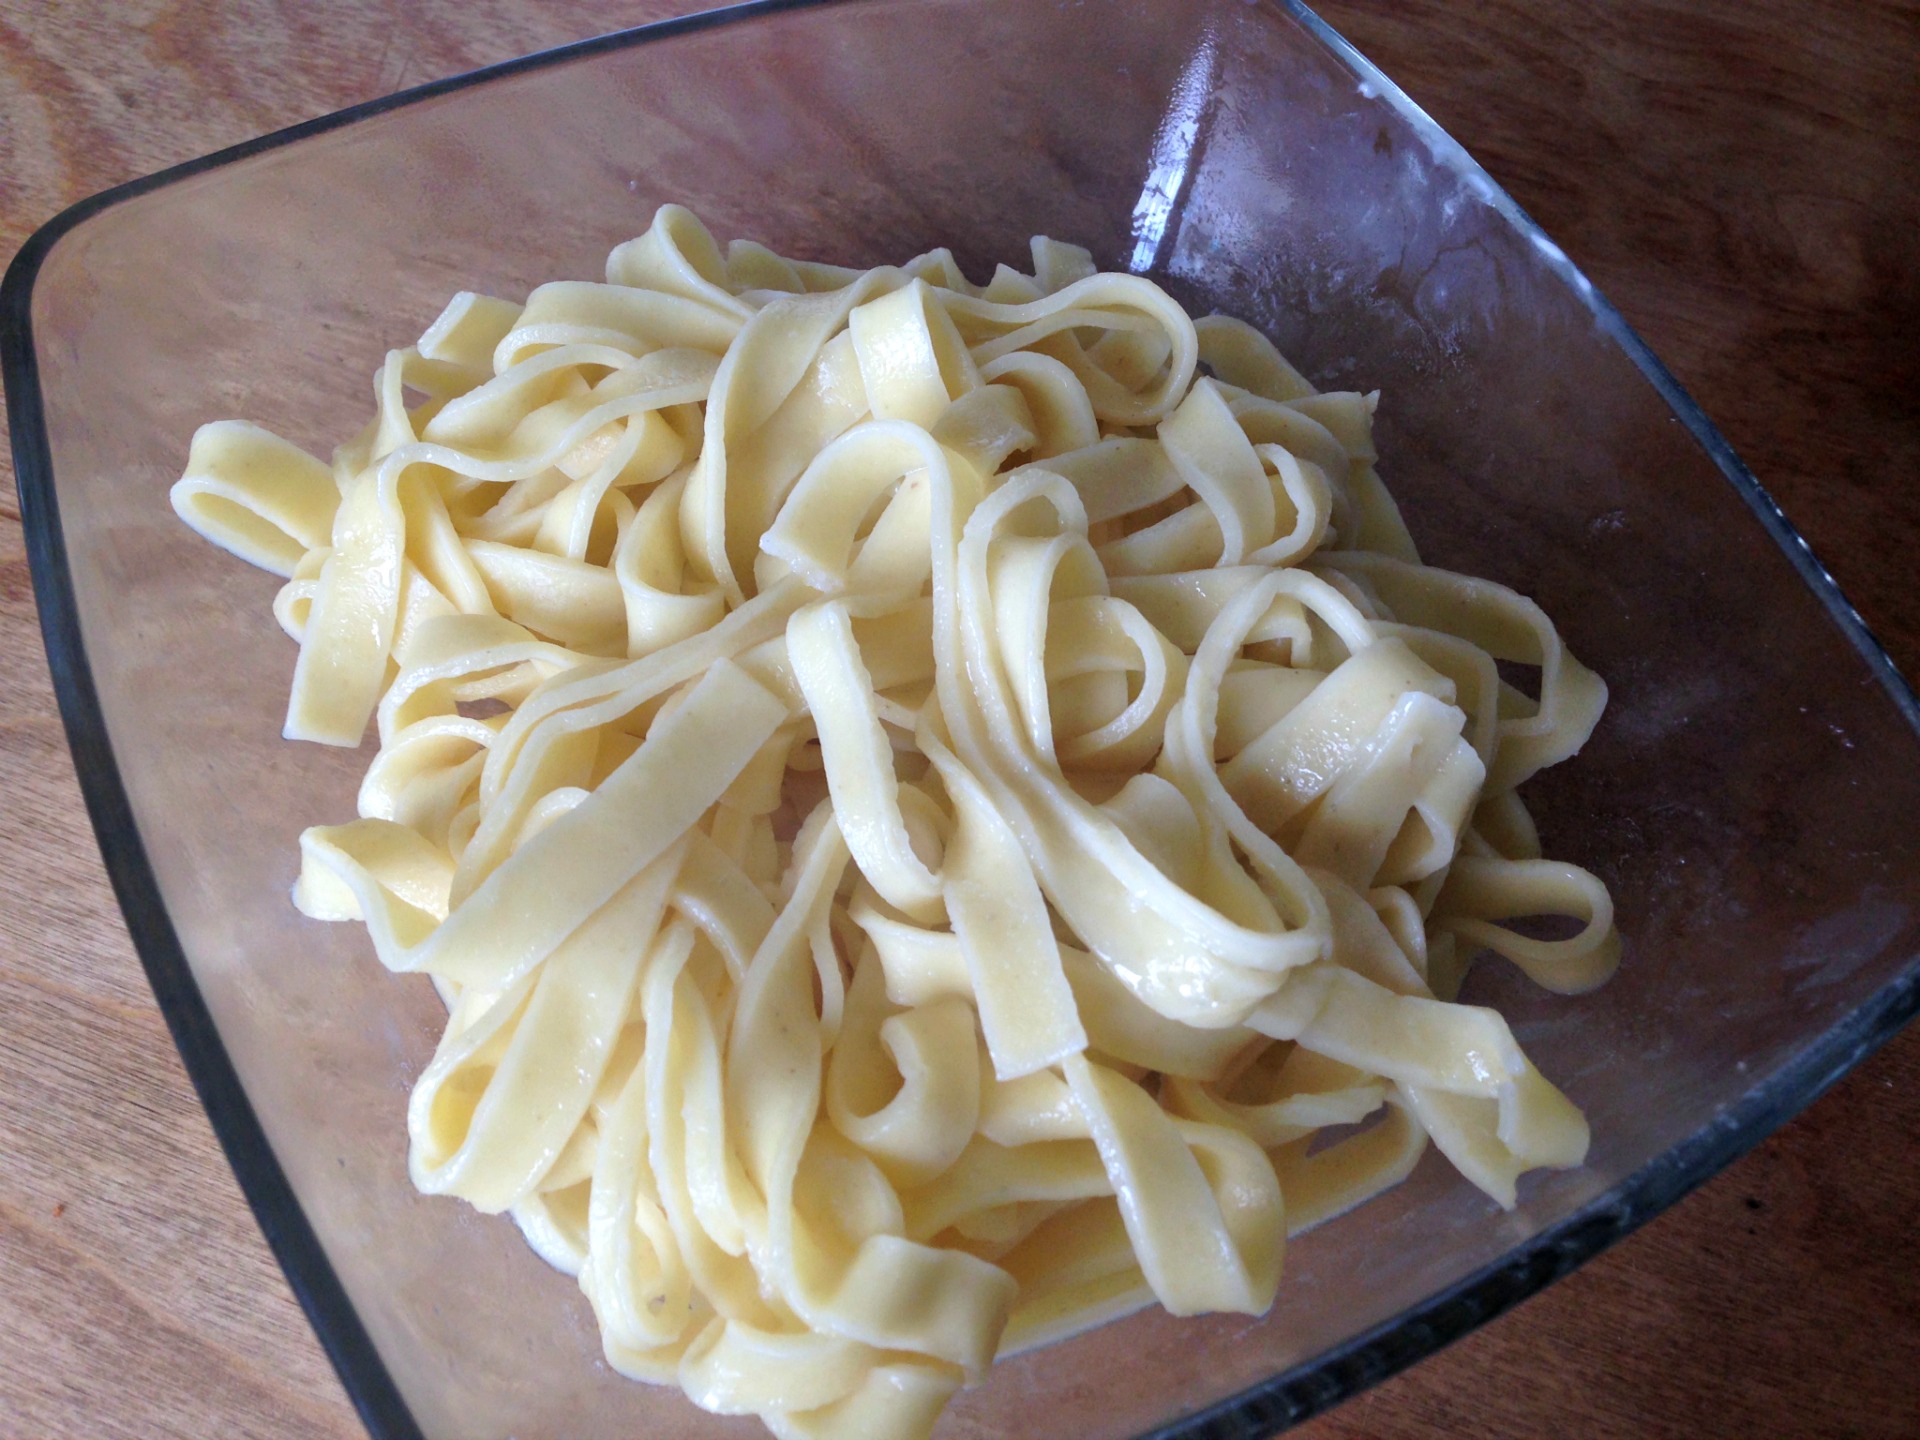 Plain egg noodles from Lucca Ravioli Company.